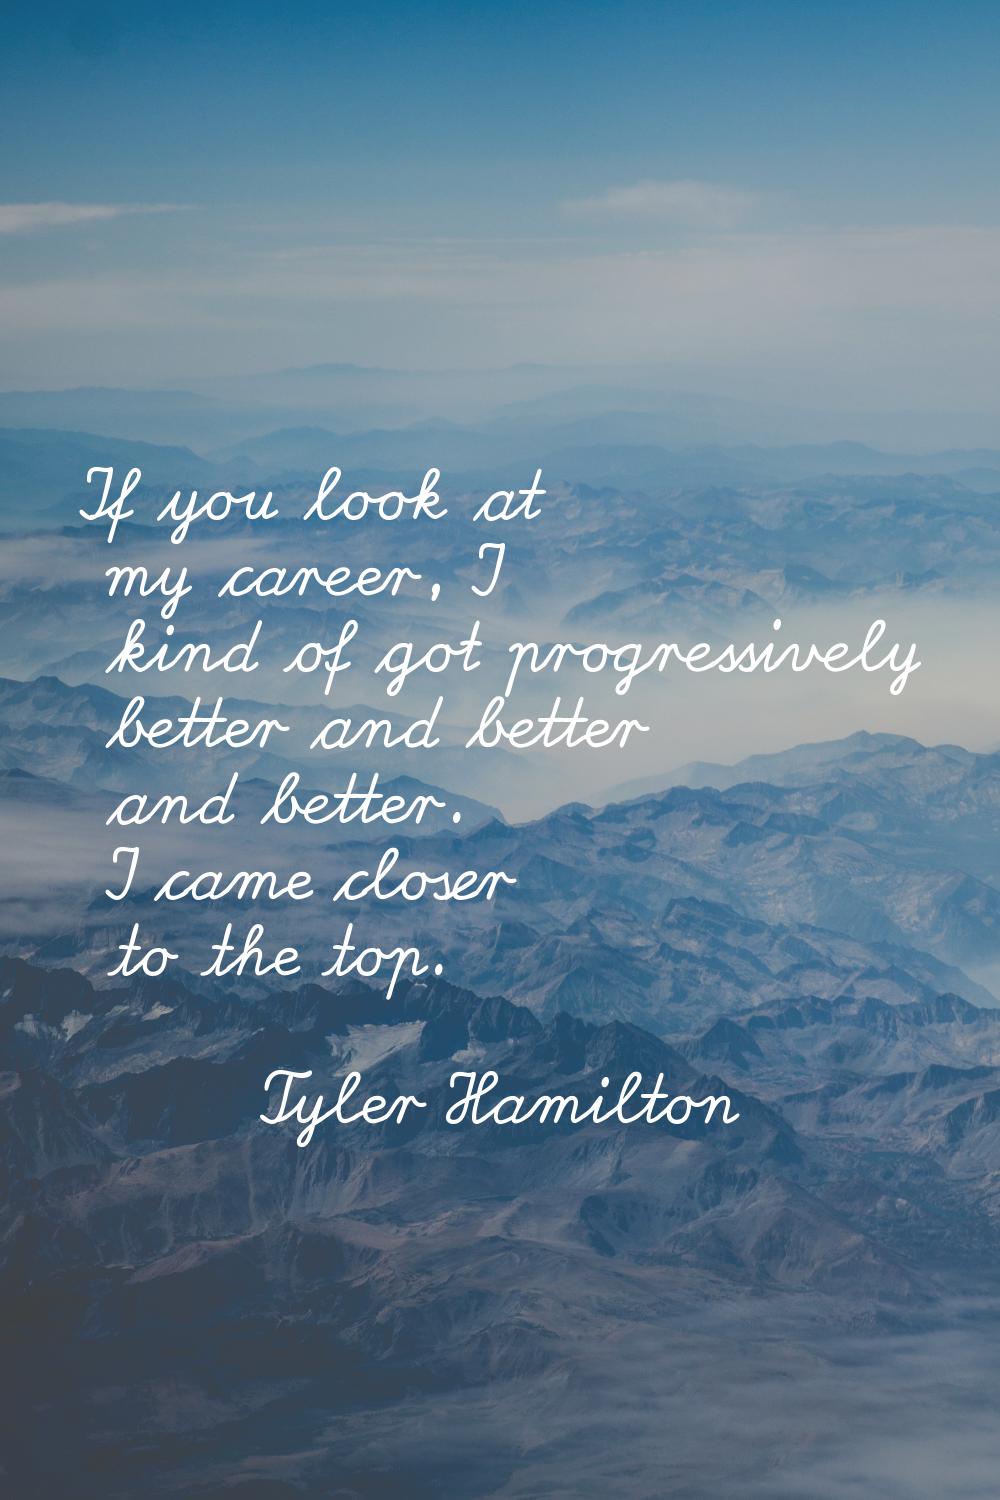 If you look at my career, I kind of got progressively better and better and better. I came closer t